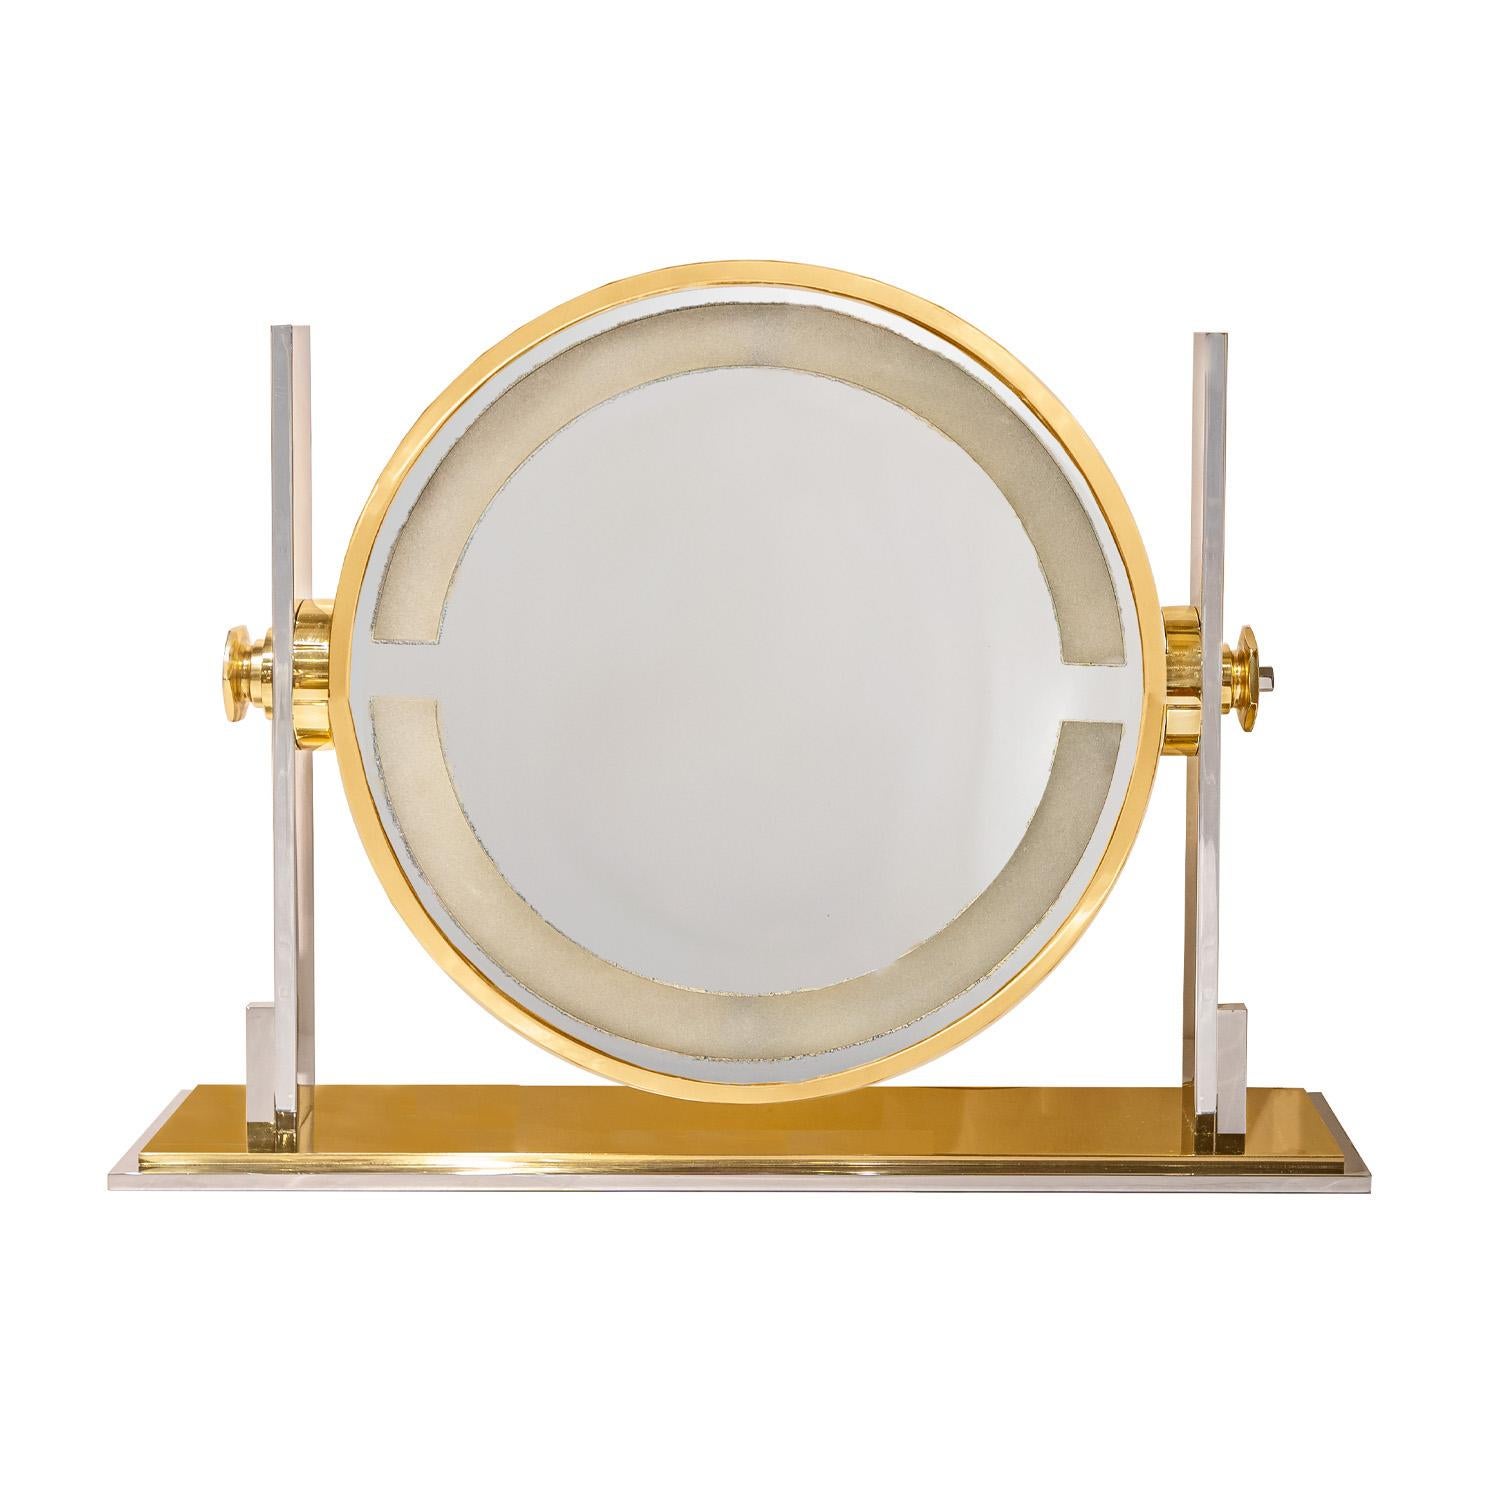 Meticulously crafted extra large adjustable illuminating magnifying mirror in polished steel and brass by Karl Springer, American 1980's. This mirror has been completely restored - light has been replaced with a LED component that will last a very